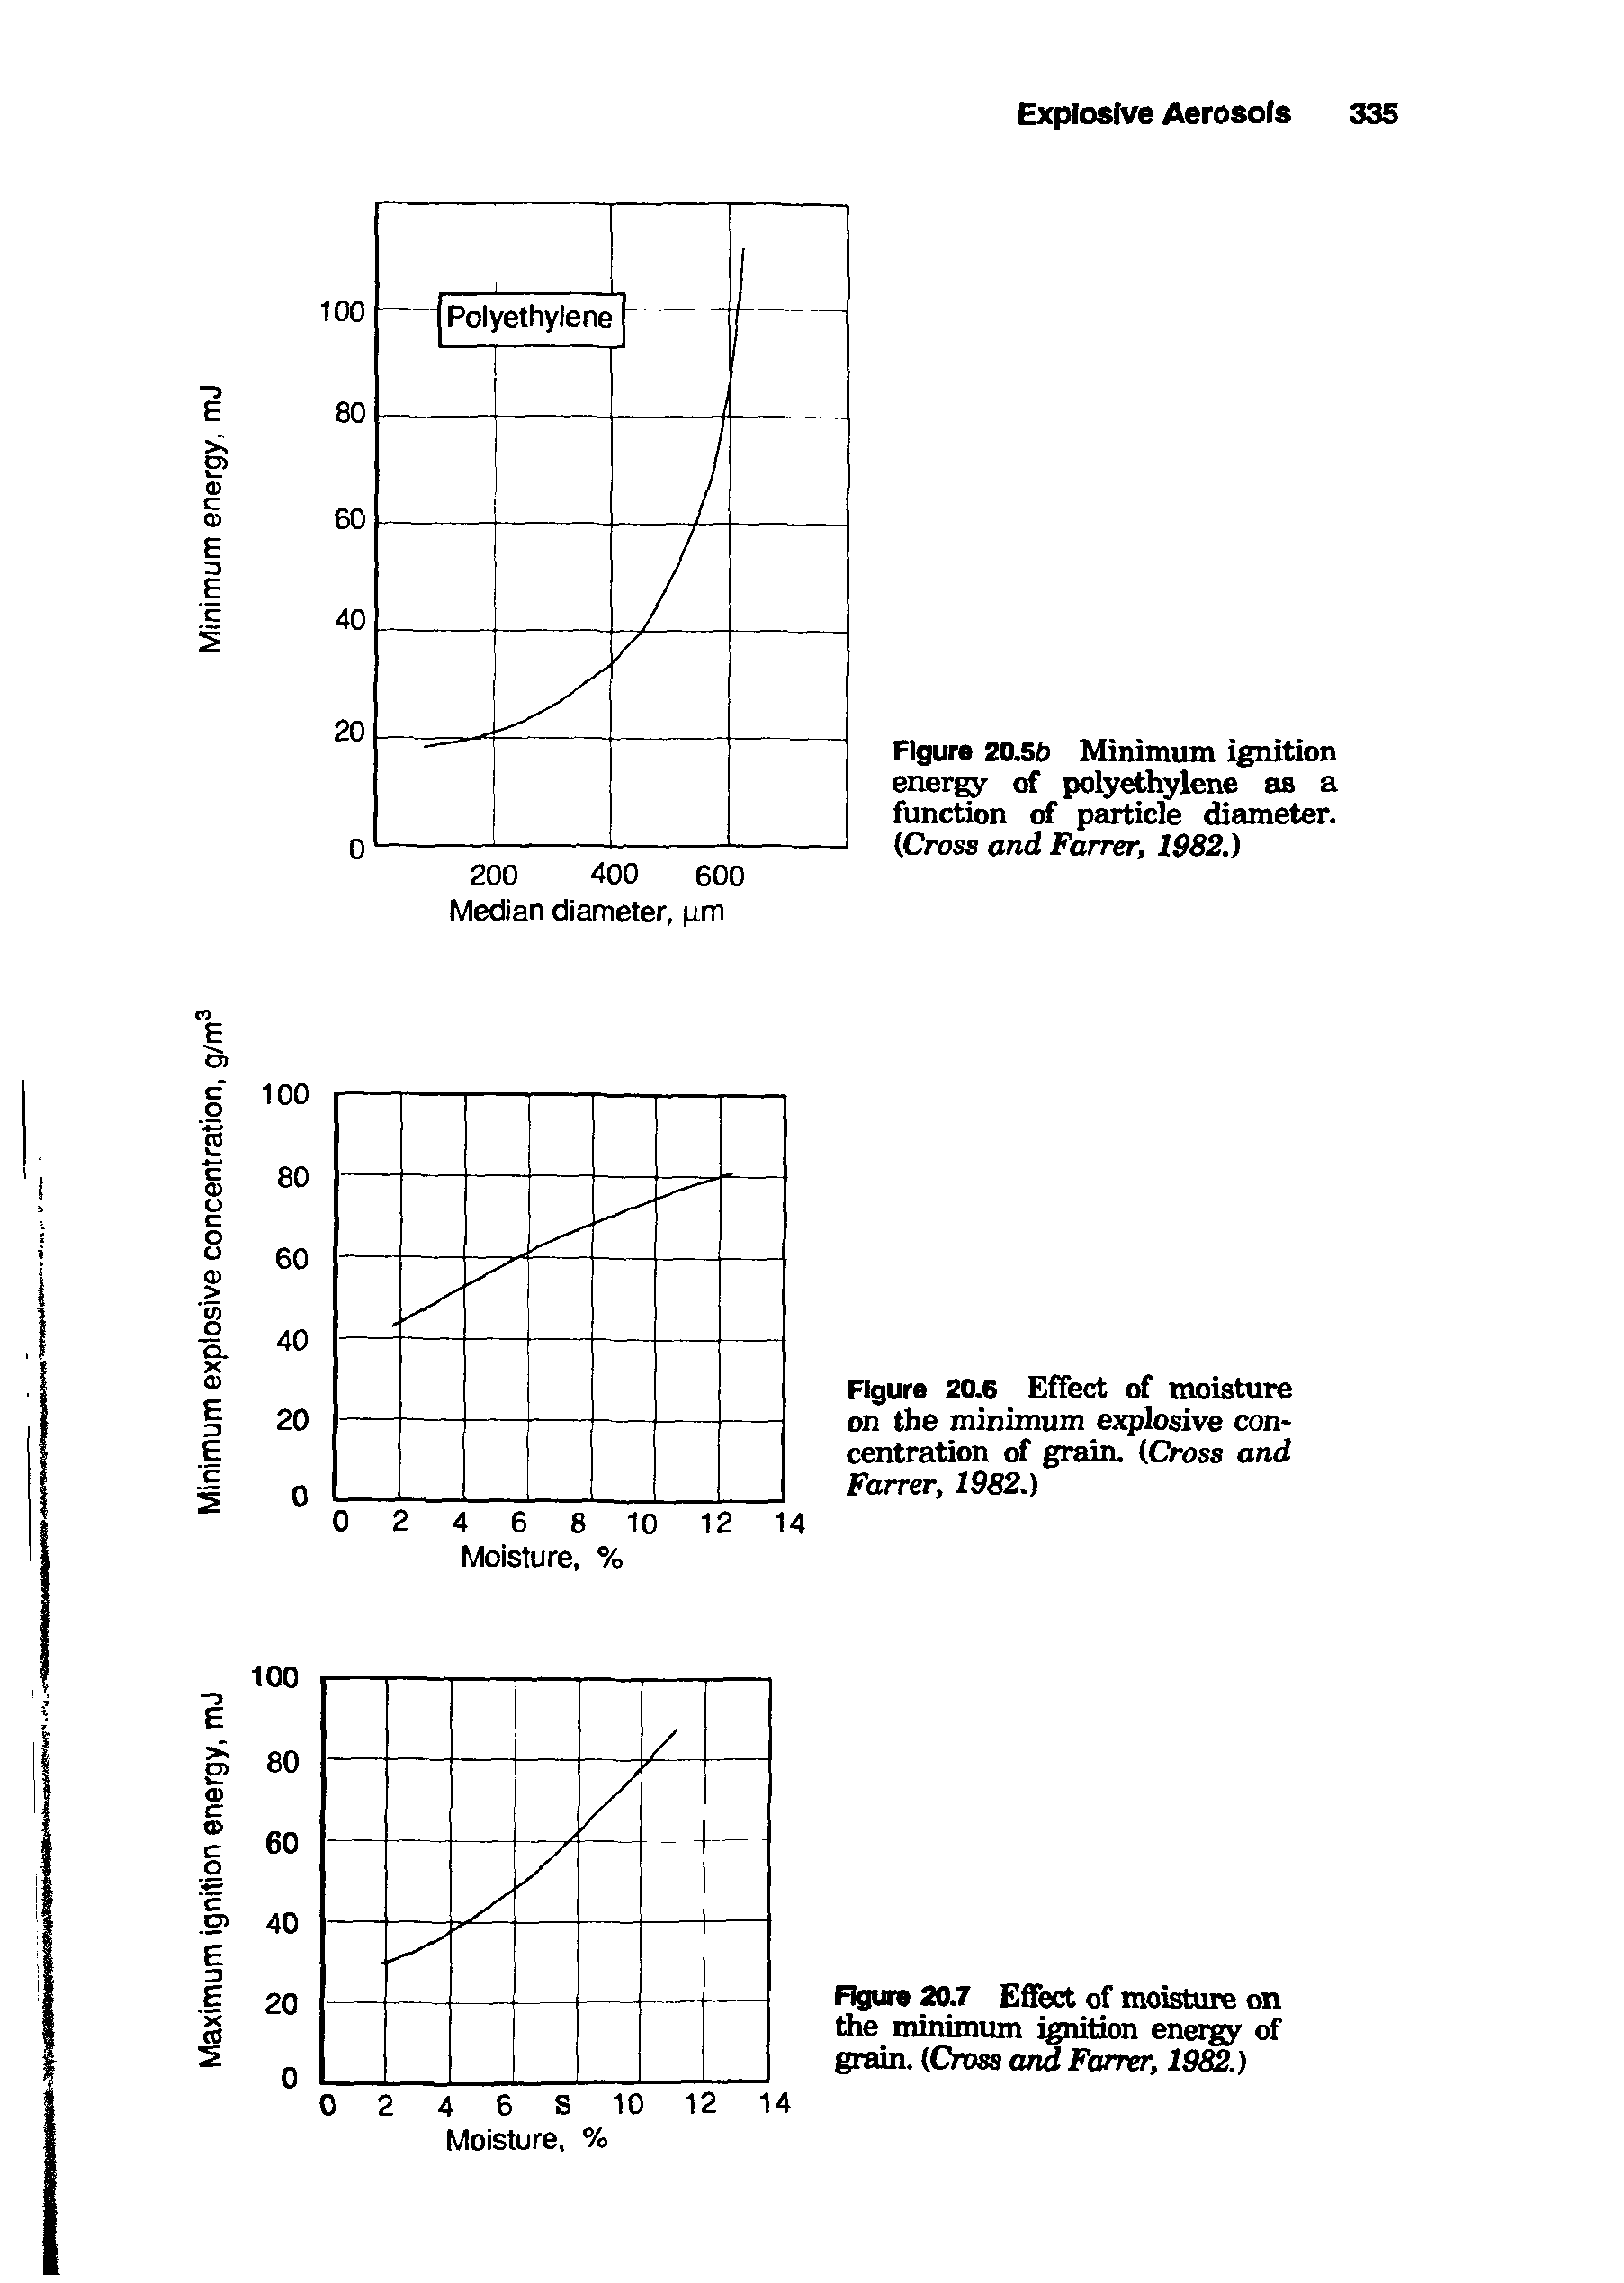 Figure 20.7 Effect of moisture on the minimum ignition energy of grain. (Cross and Farrer, 1982.)...